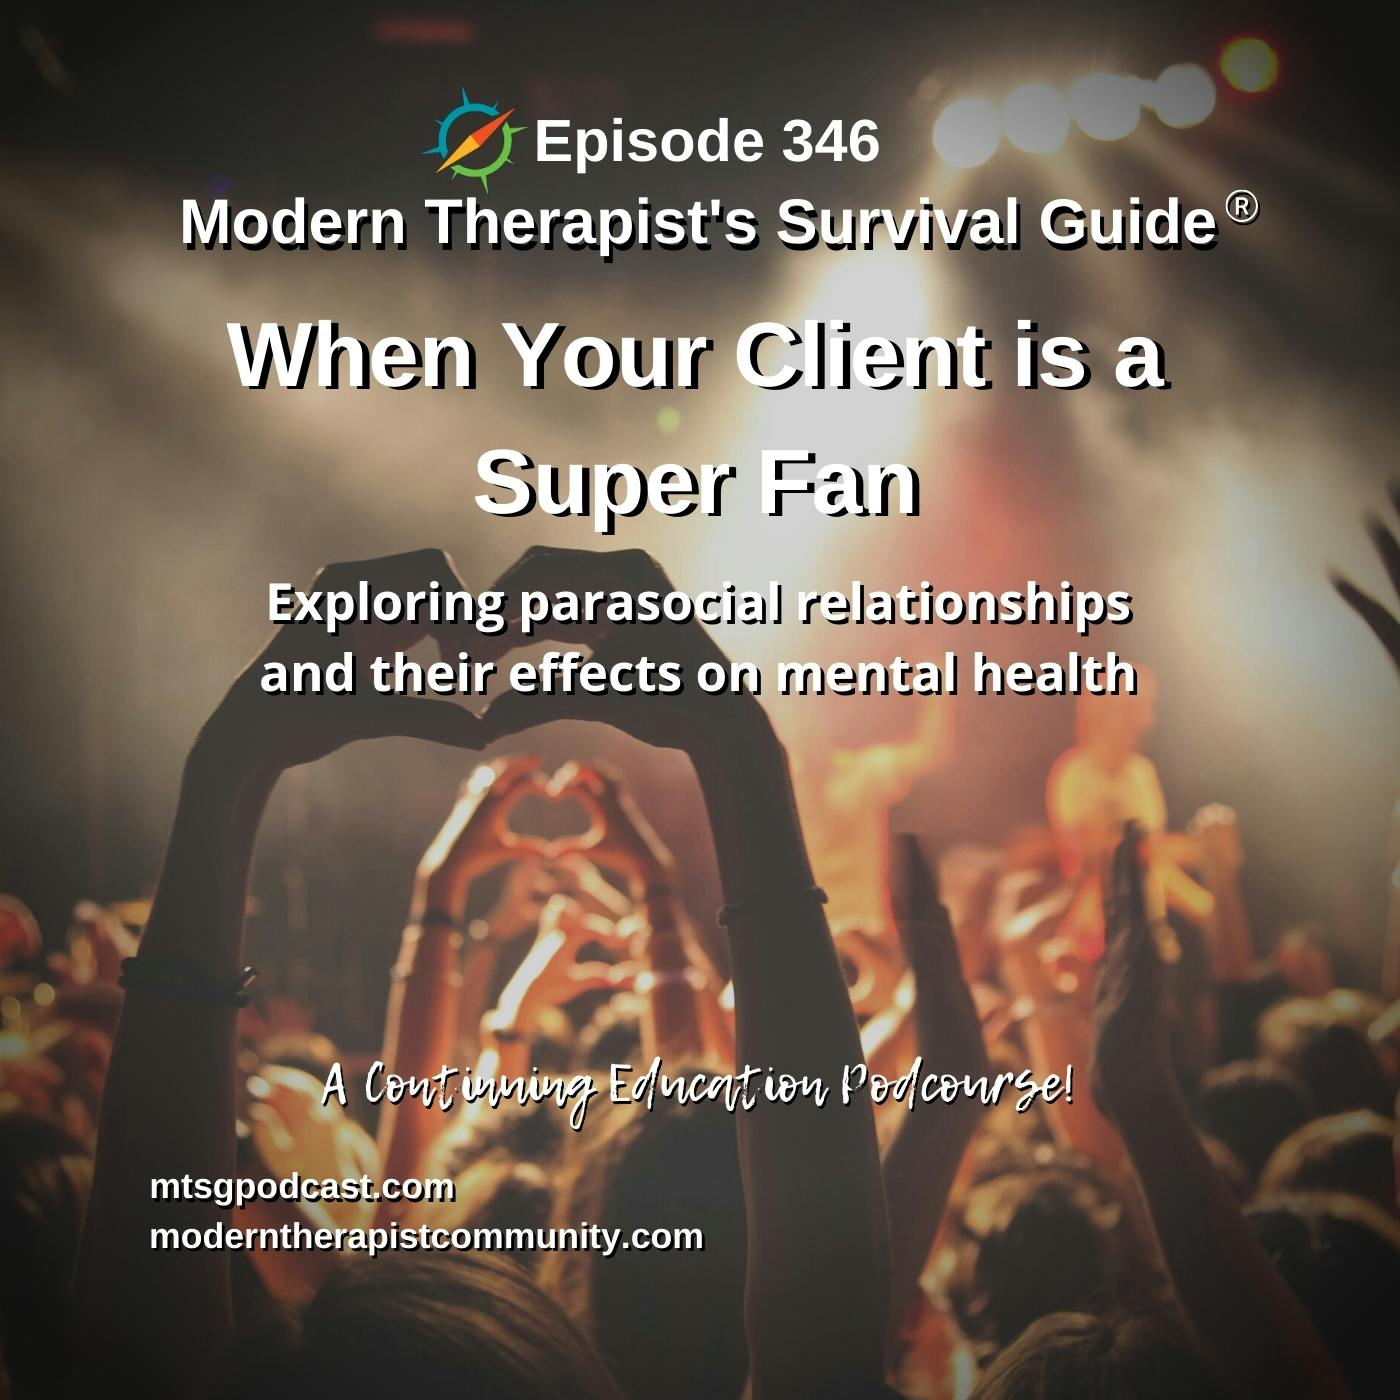 When Your Client is a Super Fan: Exploring parasocial relationships and their effects on mental health